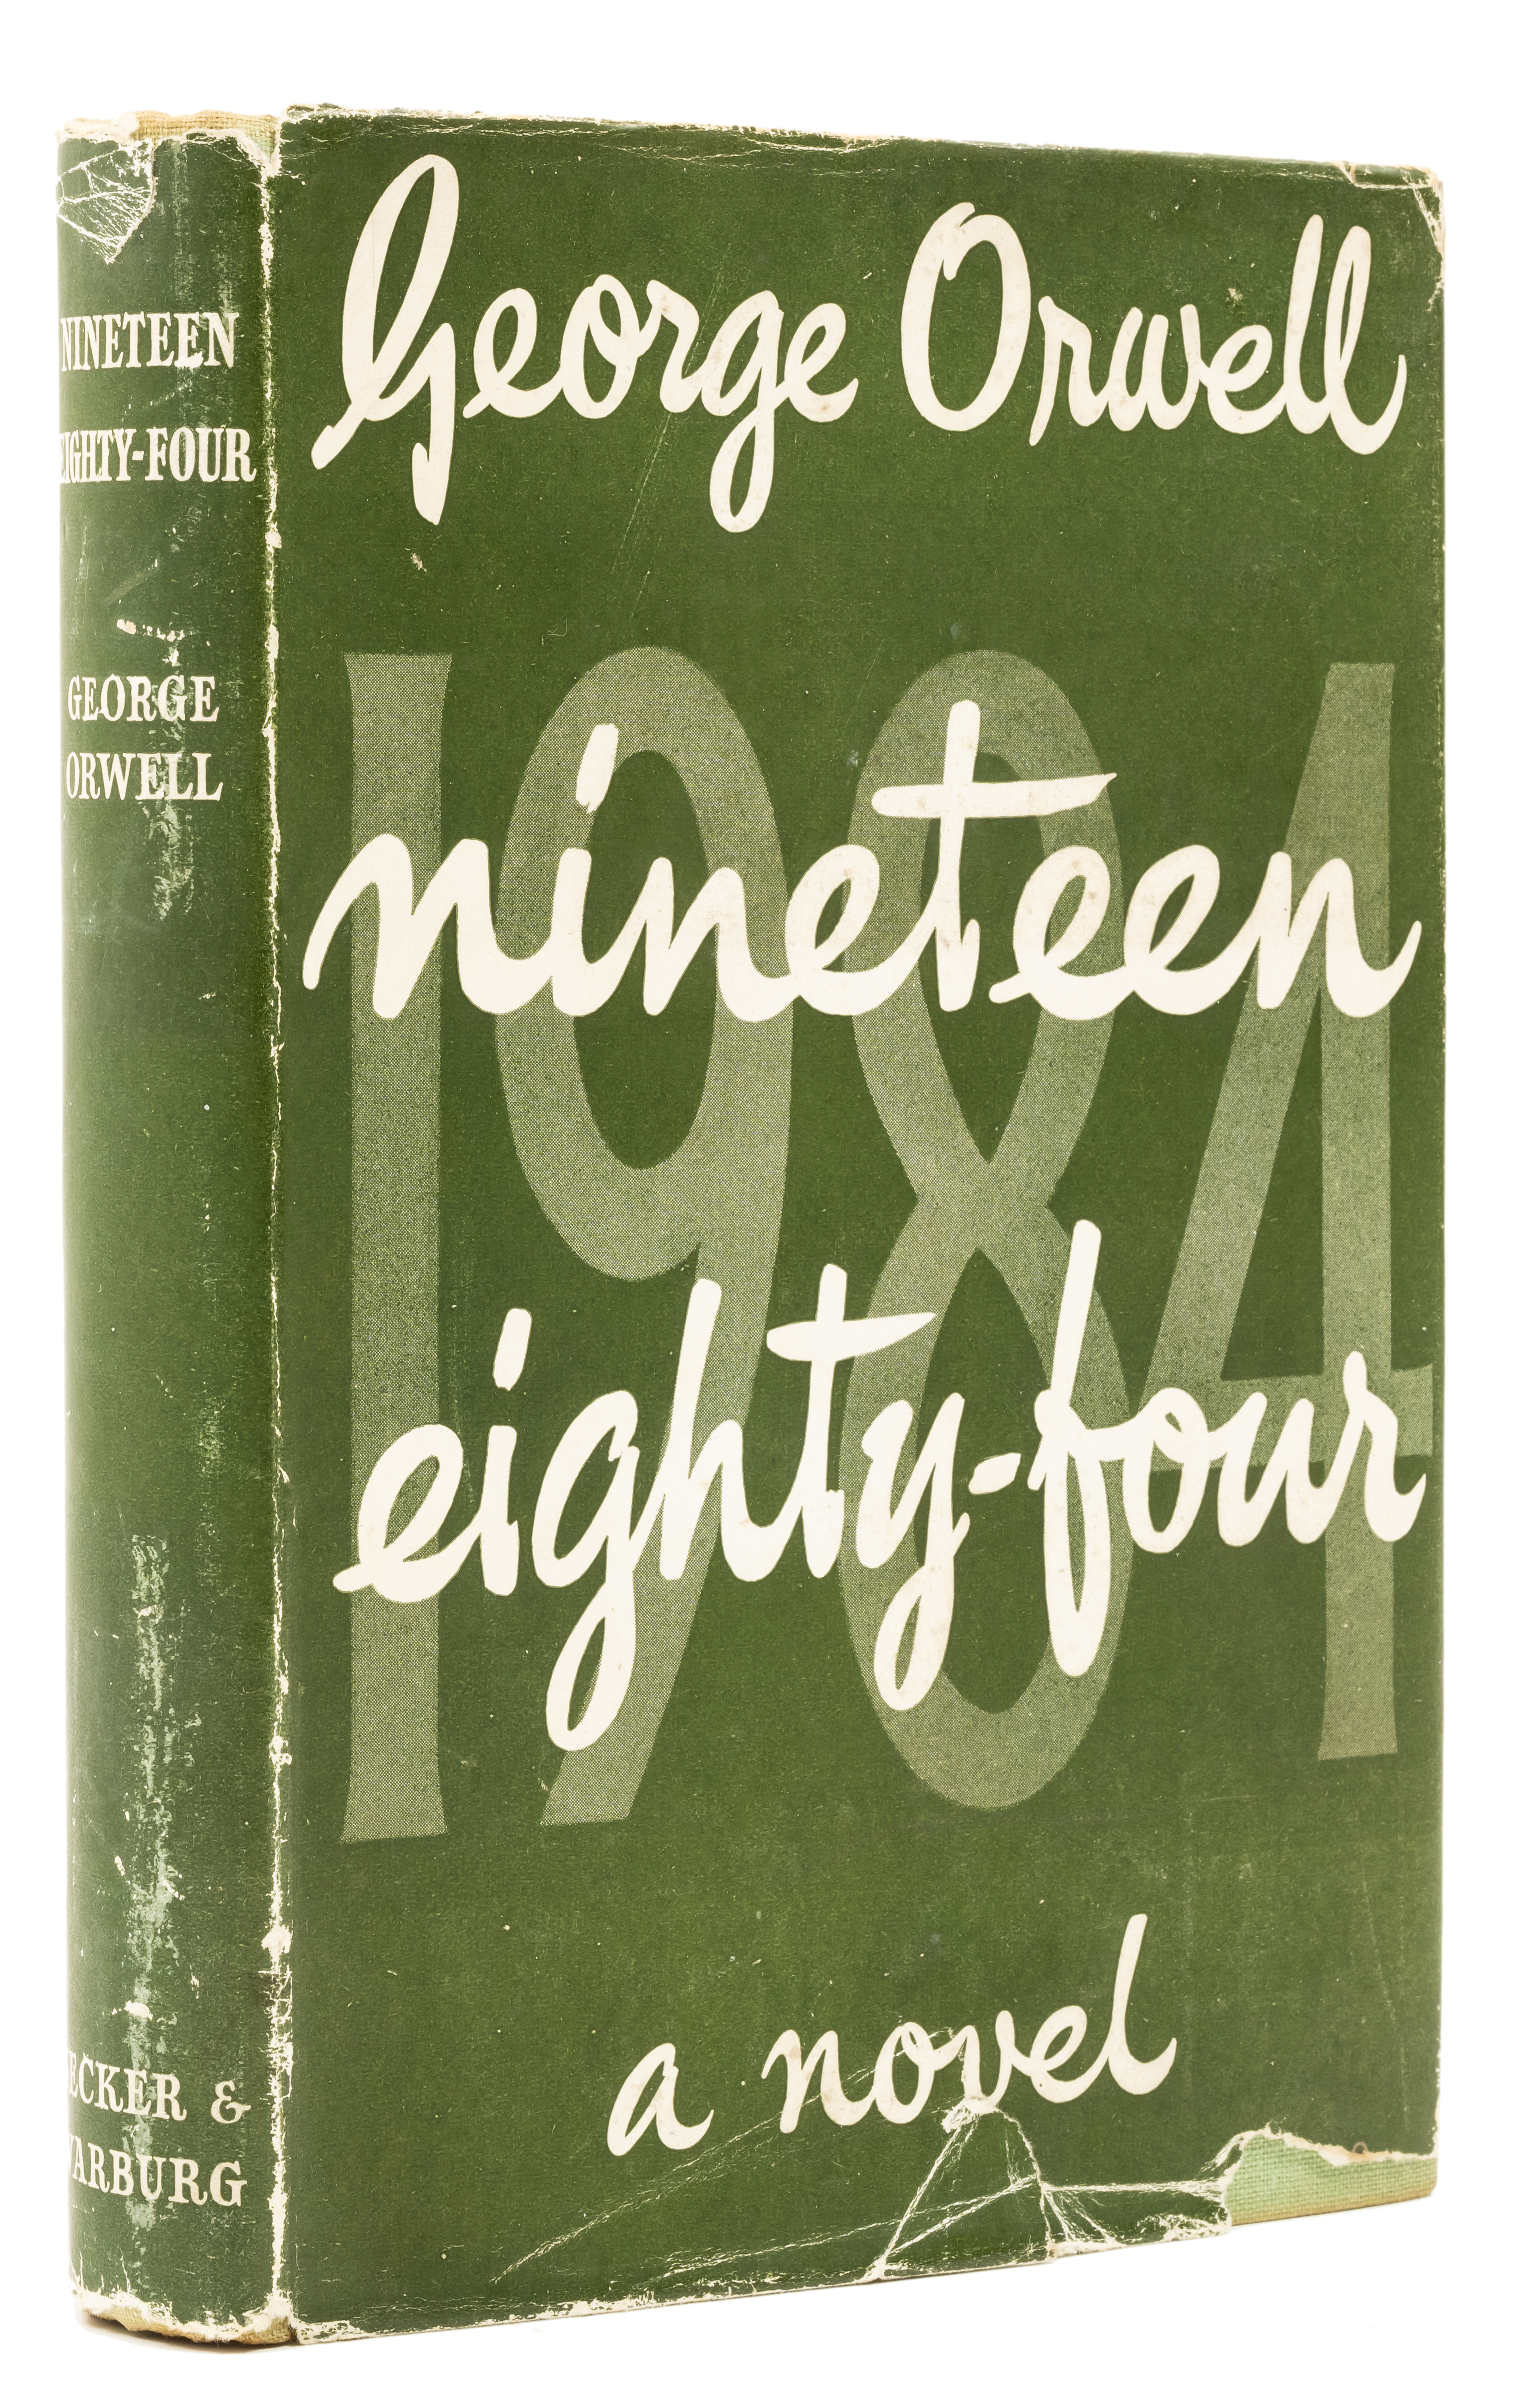 Orwell (George) Nineteen Eighty-Four, first edition, 1949